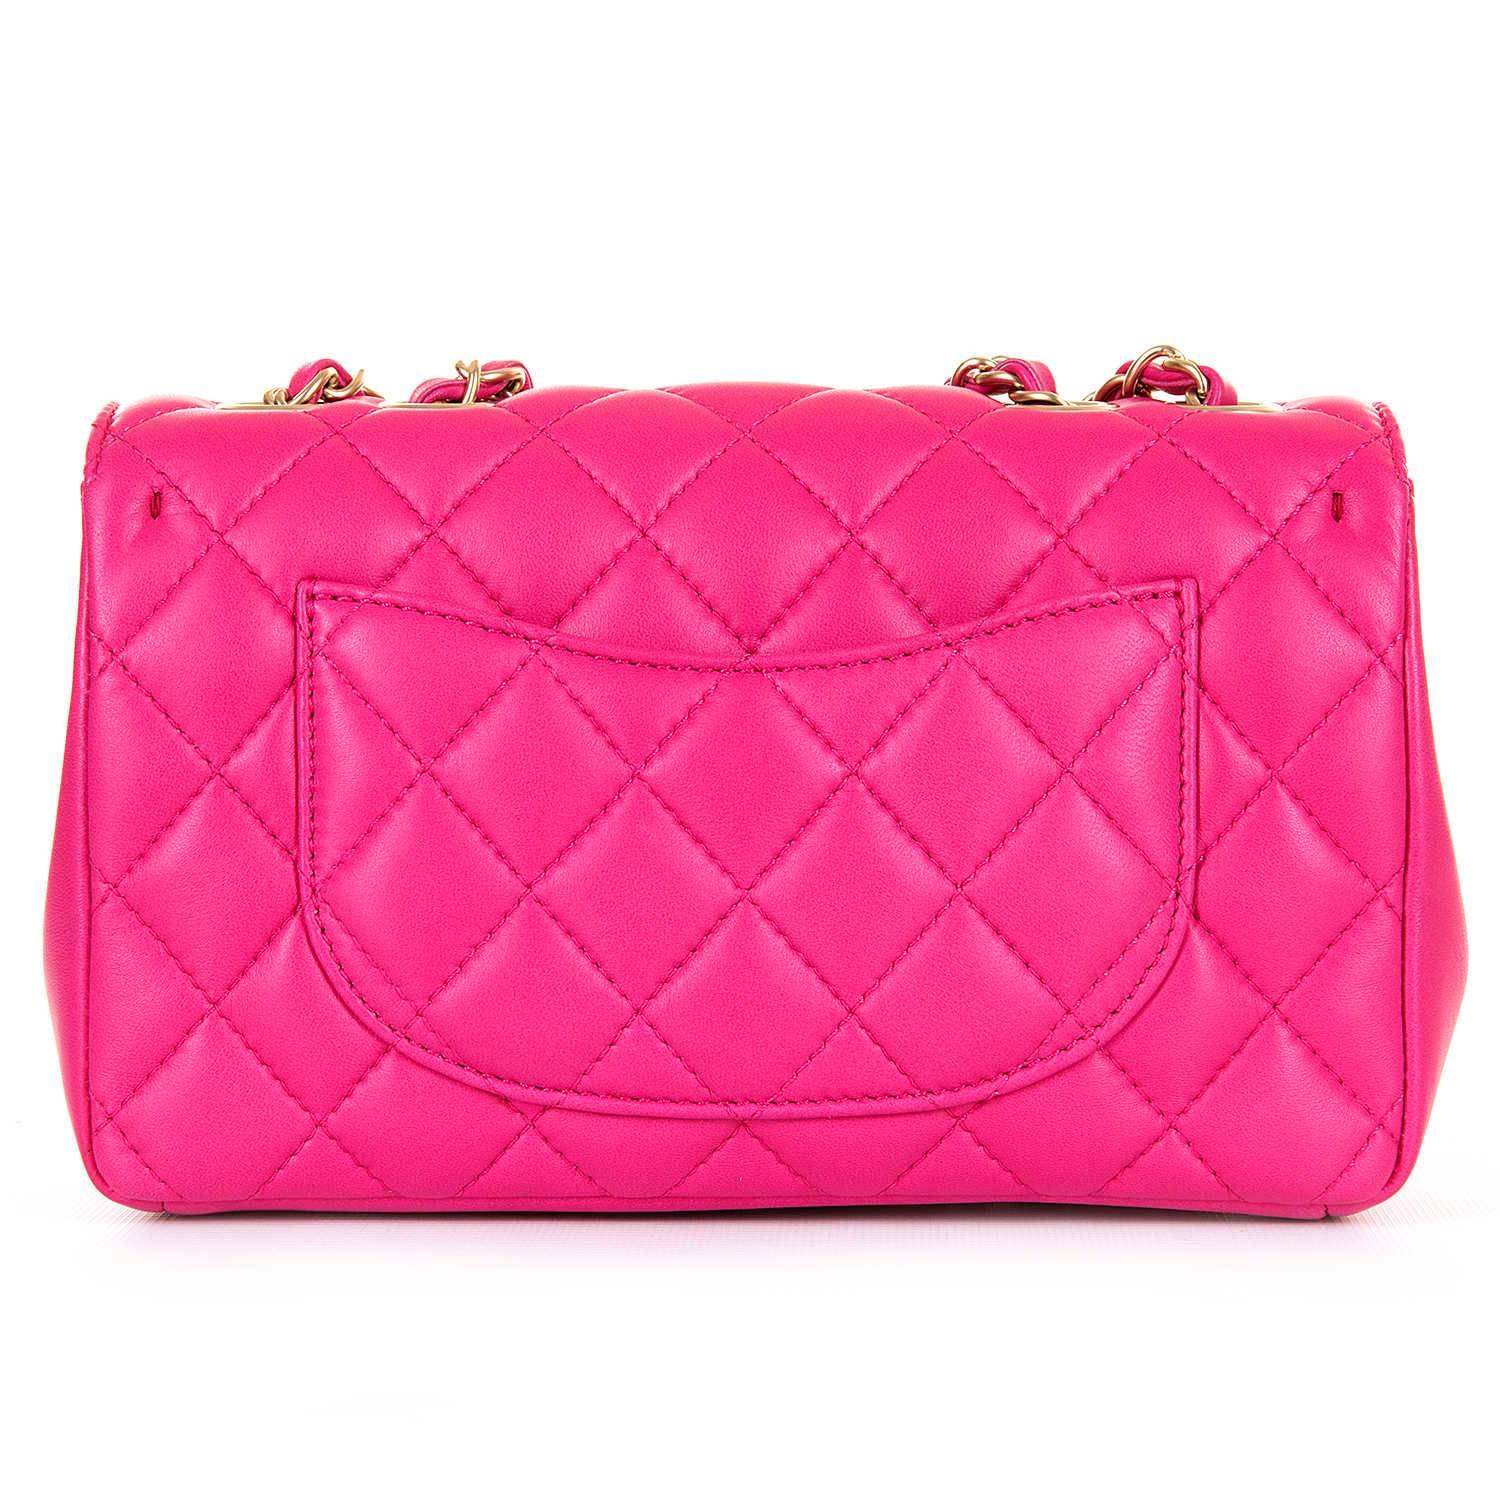 Absolutely stunning Chanel lipstick pink 'Chic Quilt' shoulder bag or clutch. The lipstick pink quilted lambskin leather is finished with Satin-gold hardware and with the adjustable double strap, the bag can be worn as a cross body, shoulder, or